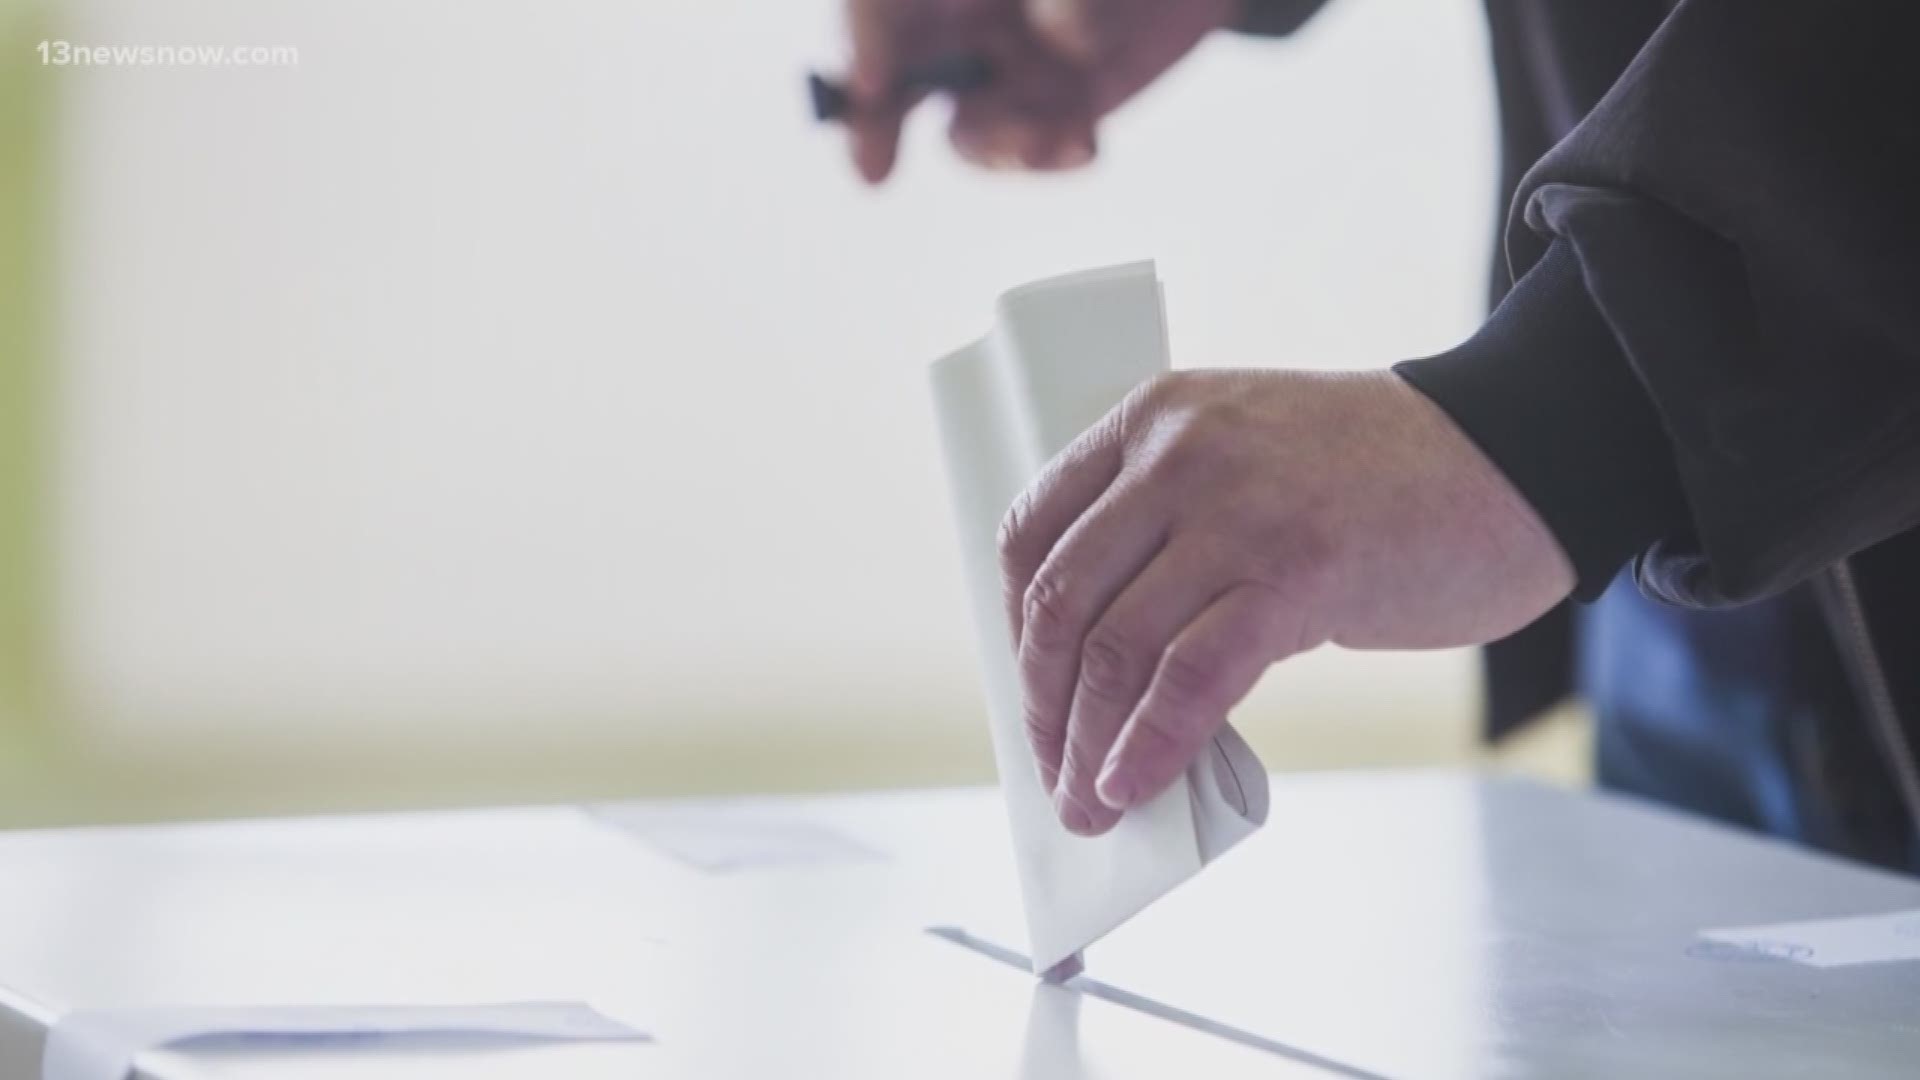 Four seats are being contested by 14 candidates in Hampton Roads's primary vote Tuesday. In this year's election, the balance of power is up for grabs as all 140 seats in Virginia's General Assembly are up for election.